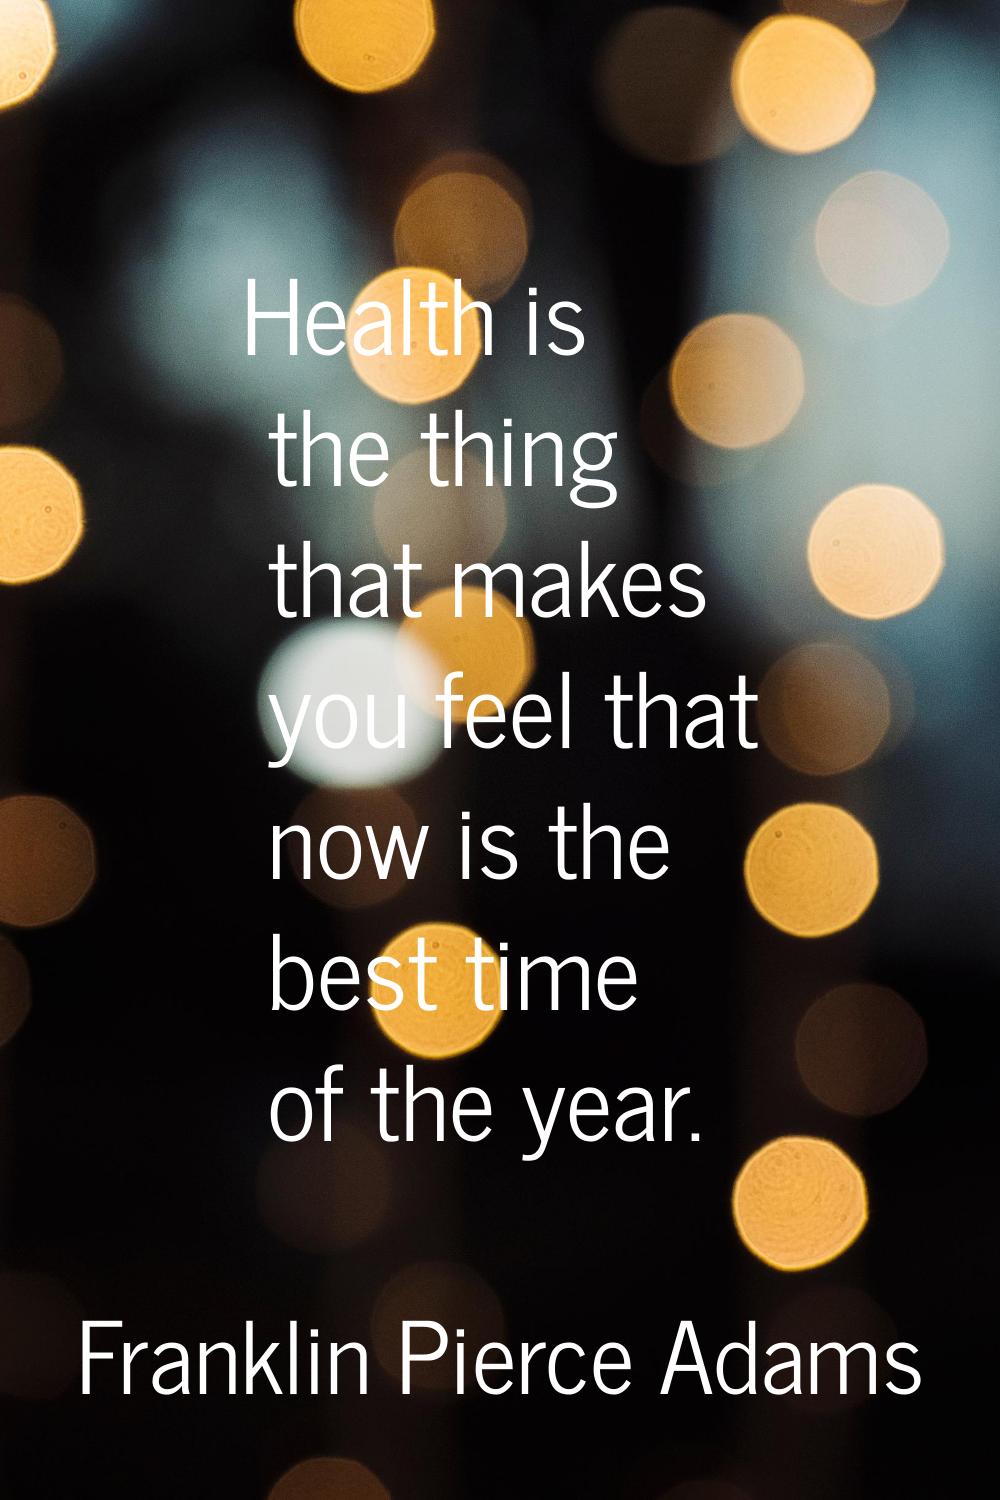 Health is the thing that makes you feel that now is the best time of the year.